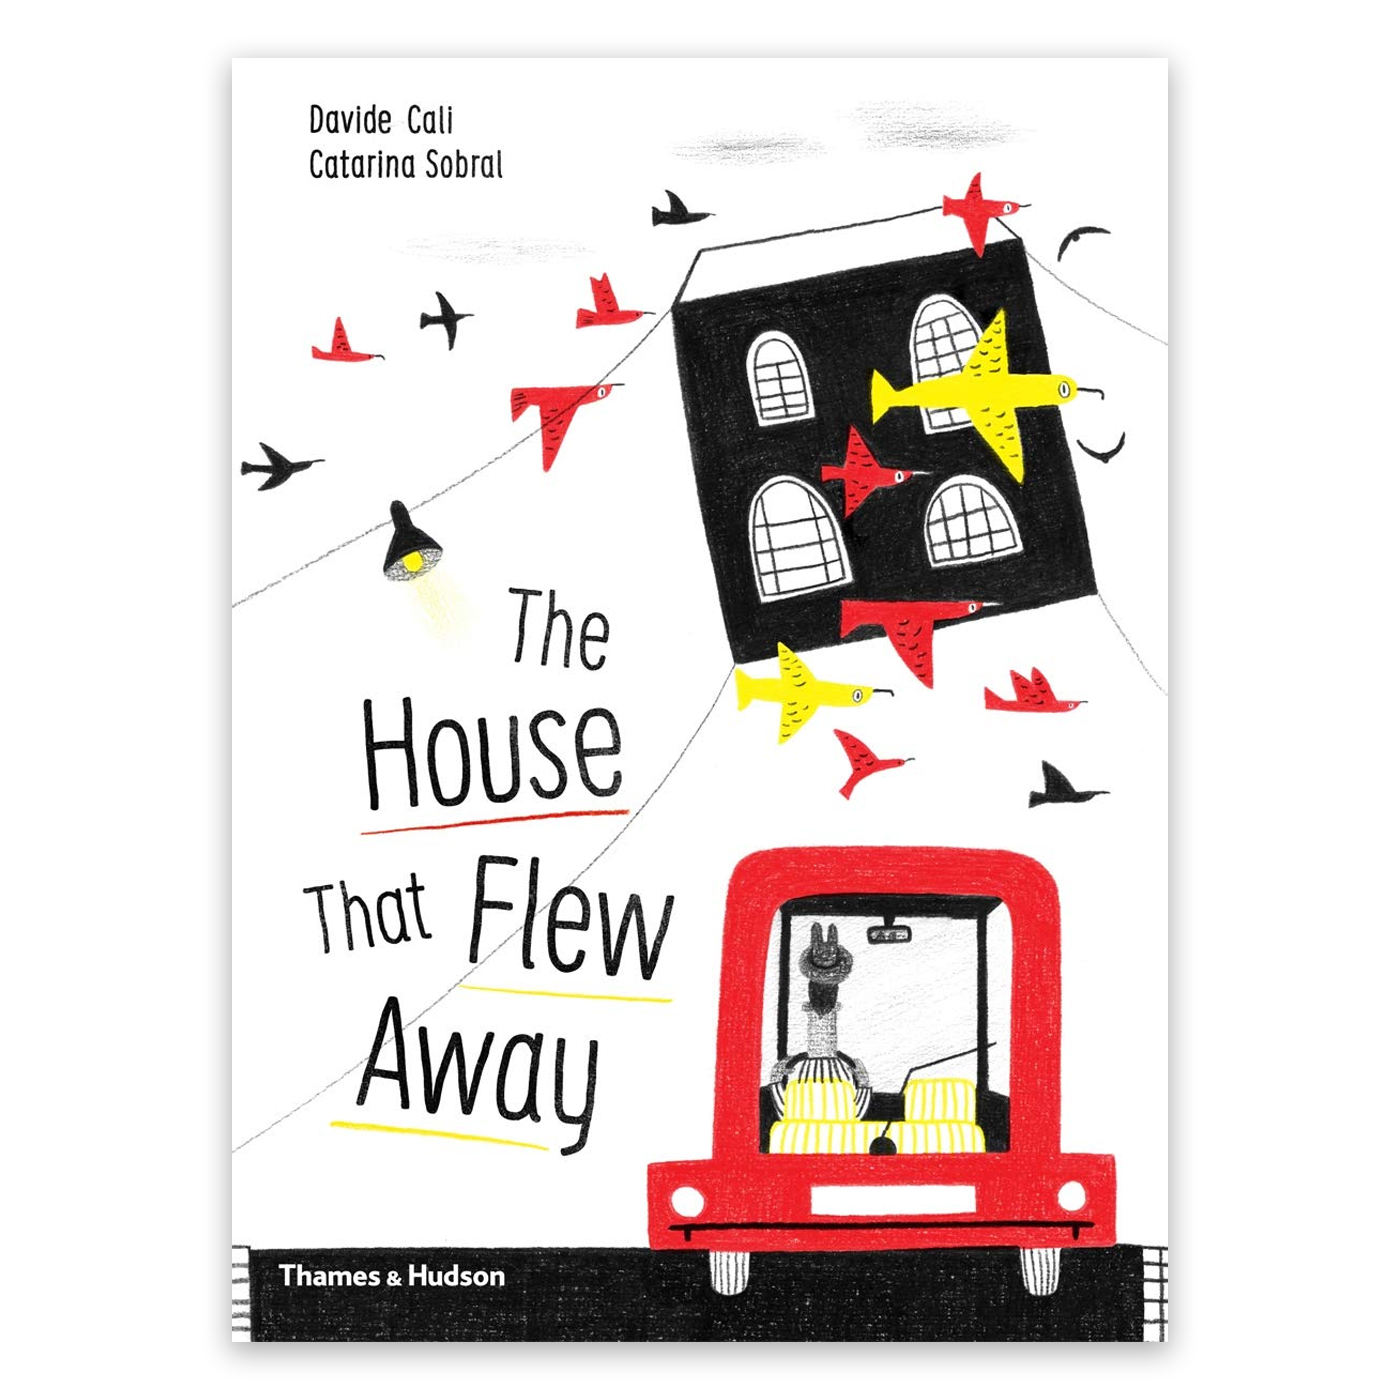  The House That Flew Away